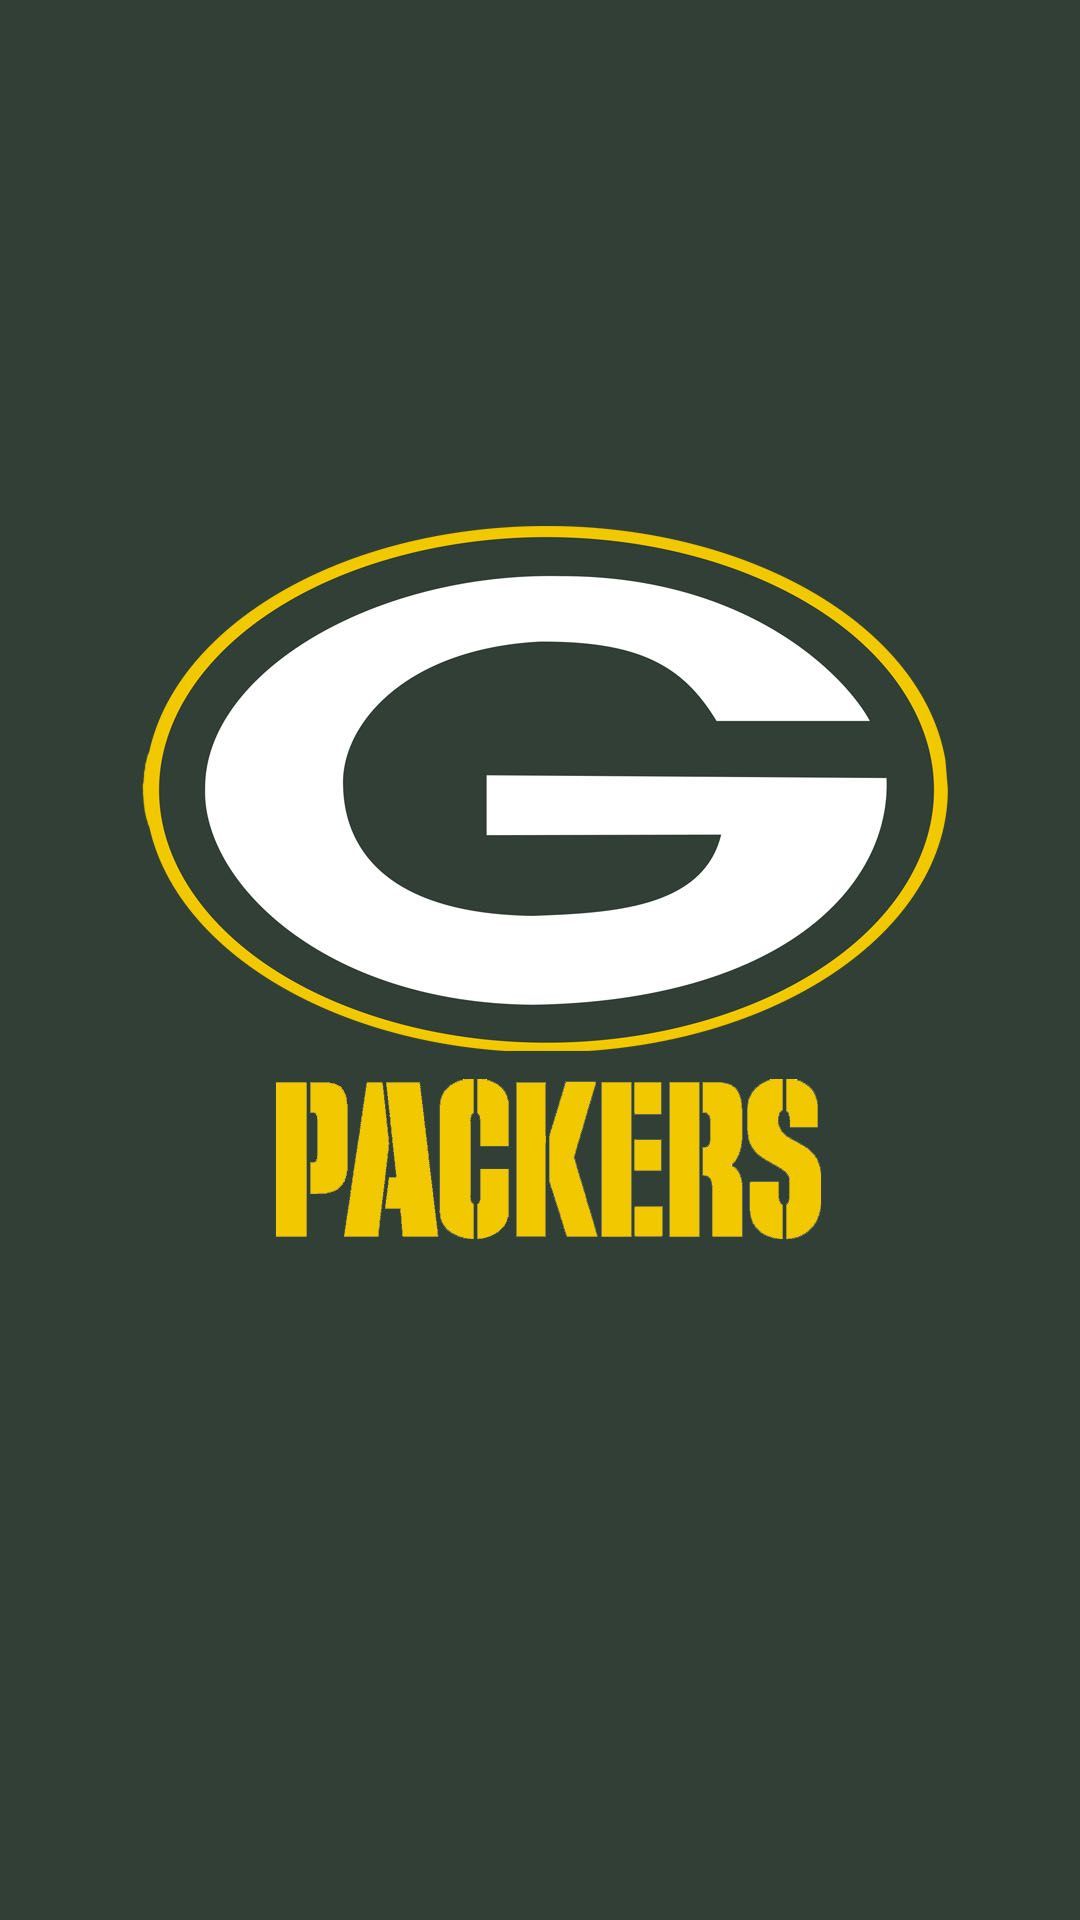 Packers iPhone Wallpaper Top Background